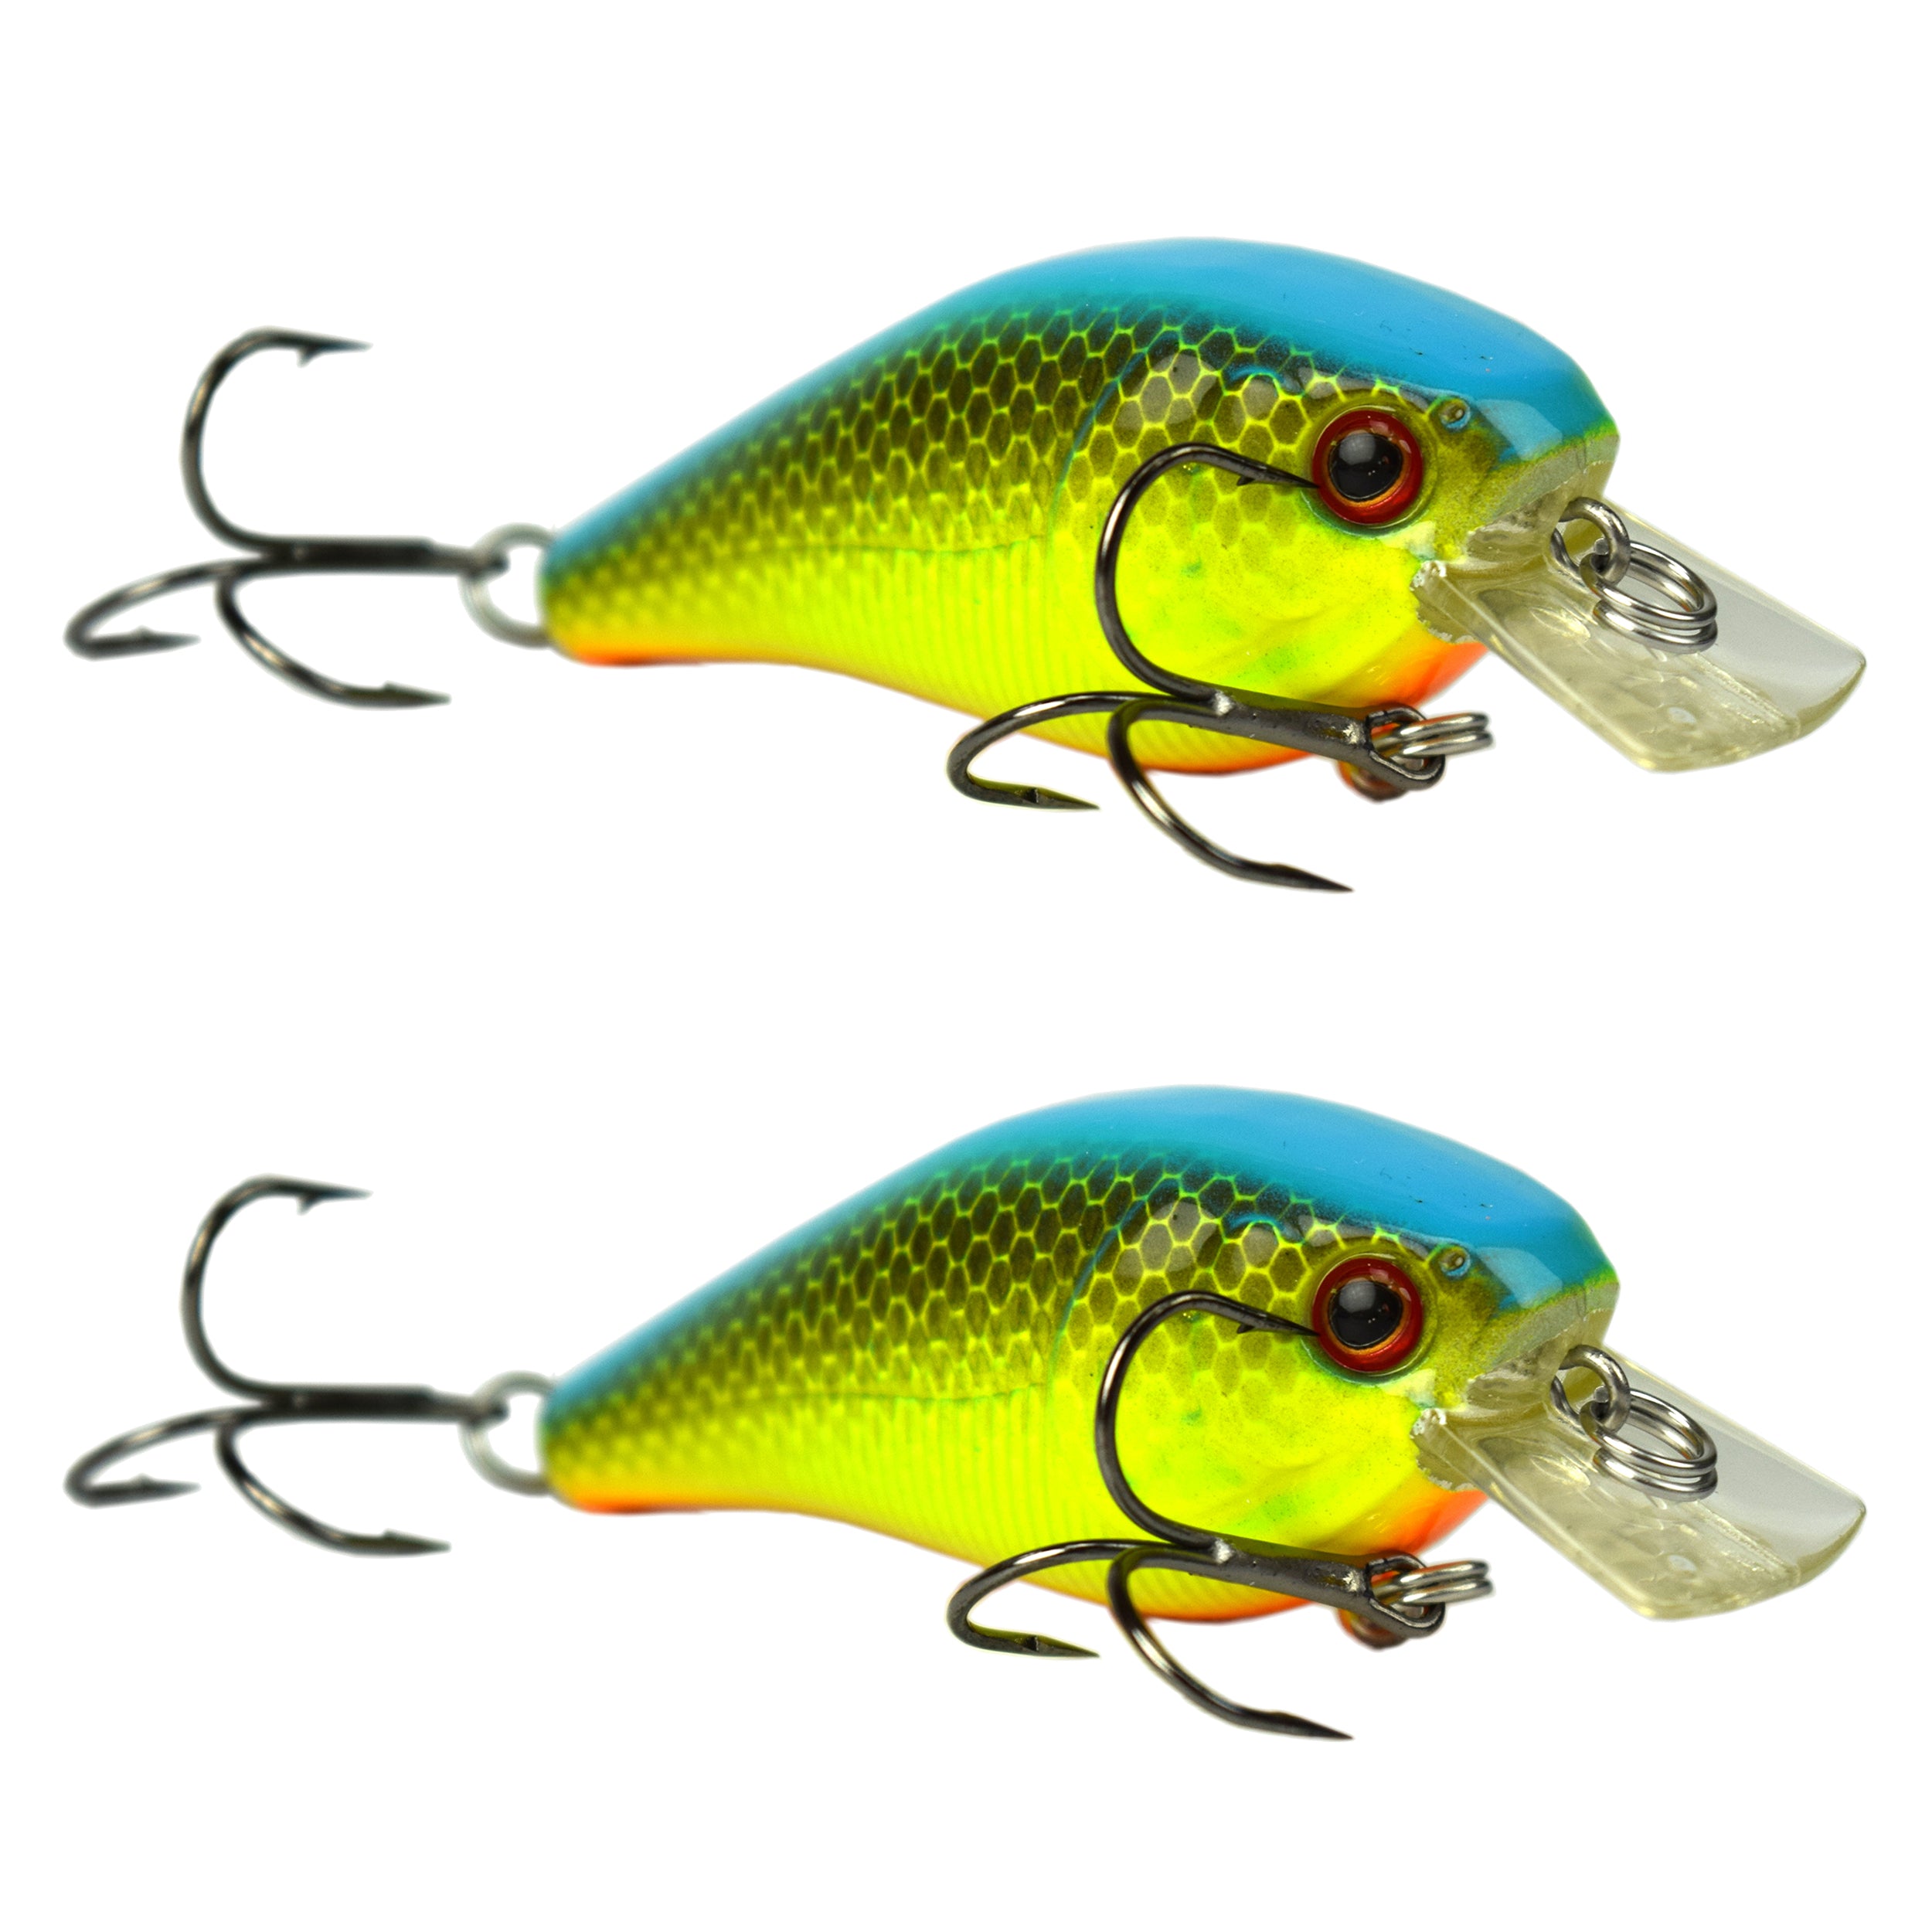 Tackle HD Warrior Spinnerbait Skirts w/Tail 3-Pack - Chartreuse